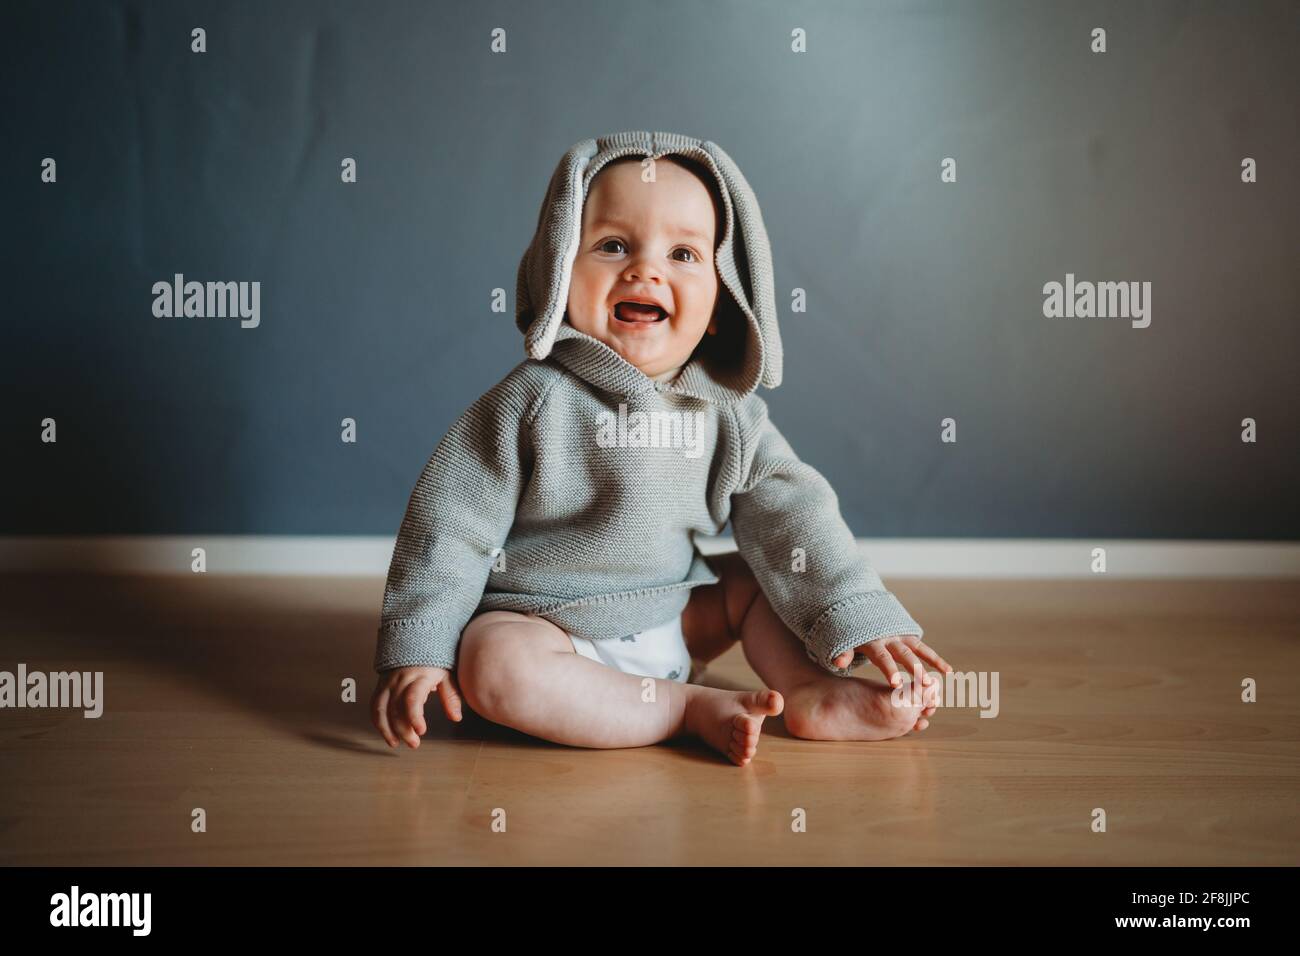 Cute smiling baby boy wearing a bunny jumper with ears for Easter Stock Photo